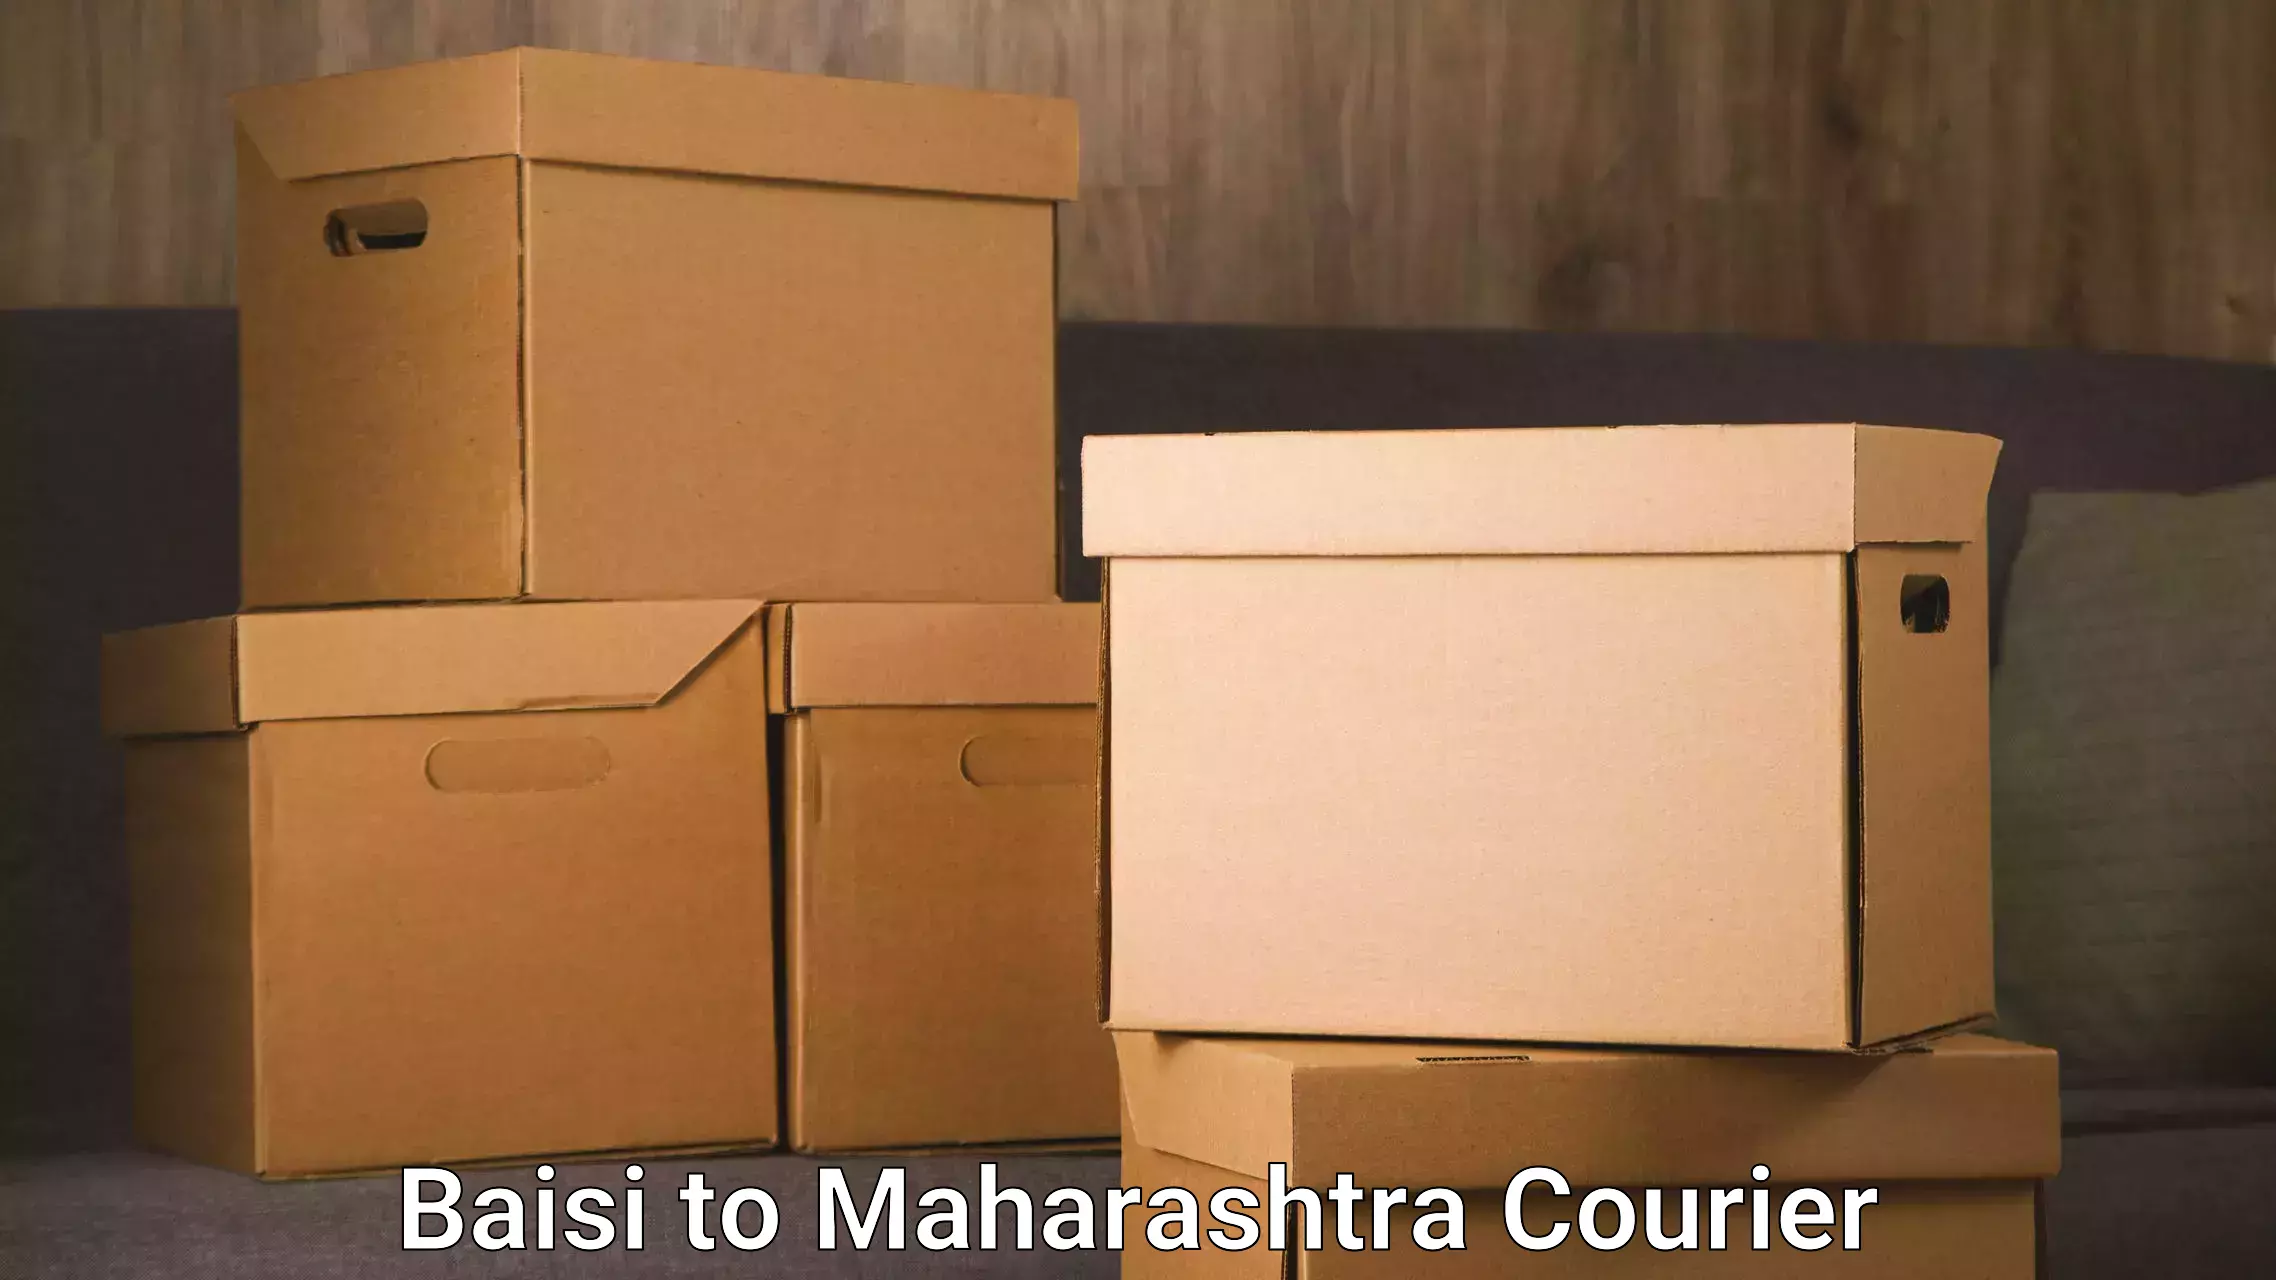 Furniture transport services in Baisi to Maharashtra